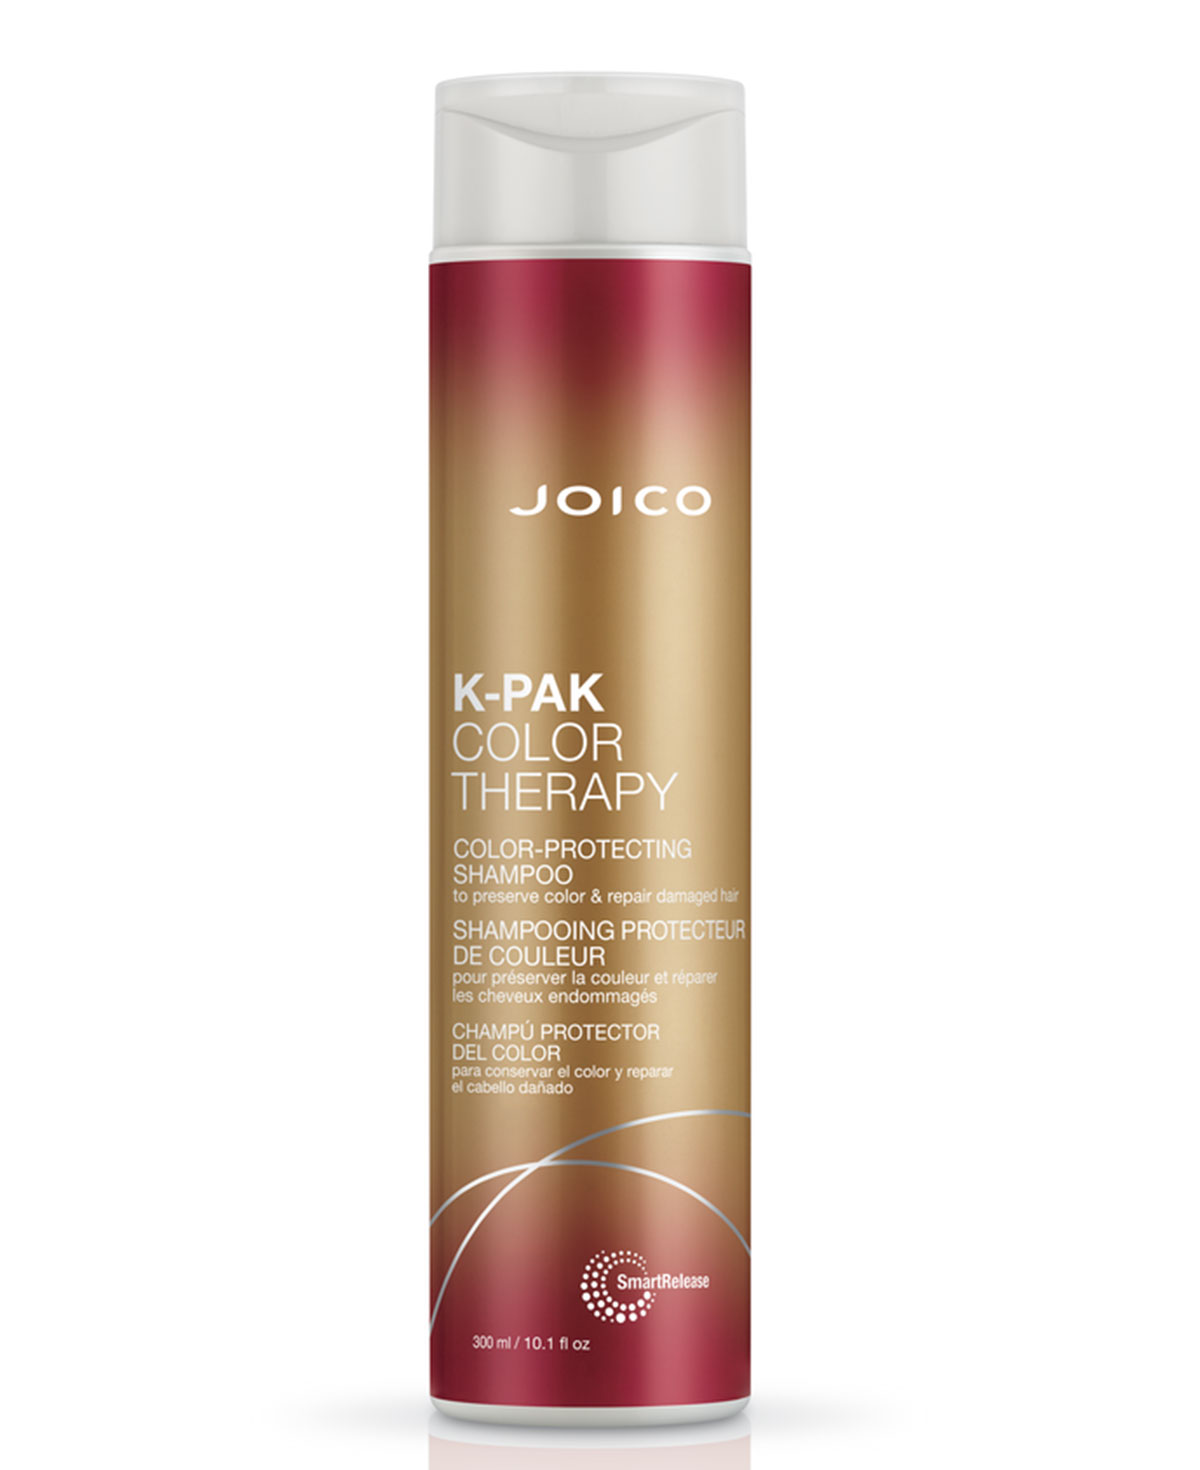 Joico K-Pak Color Therapy Color-Protecting Shampoo 300ml 